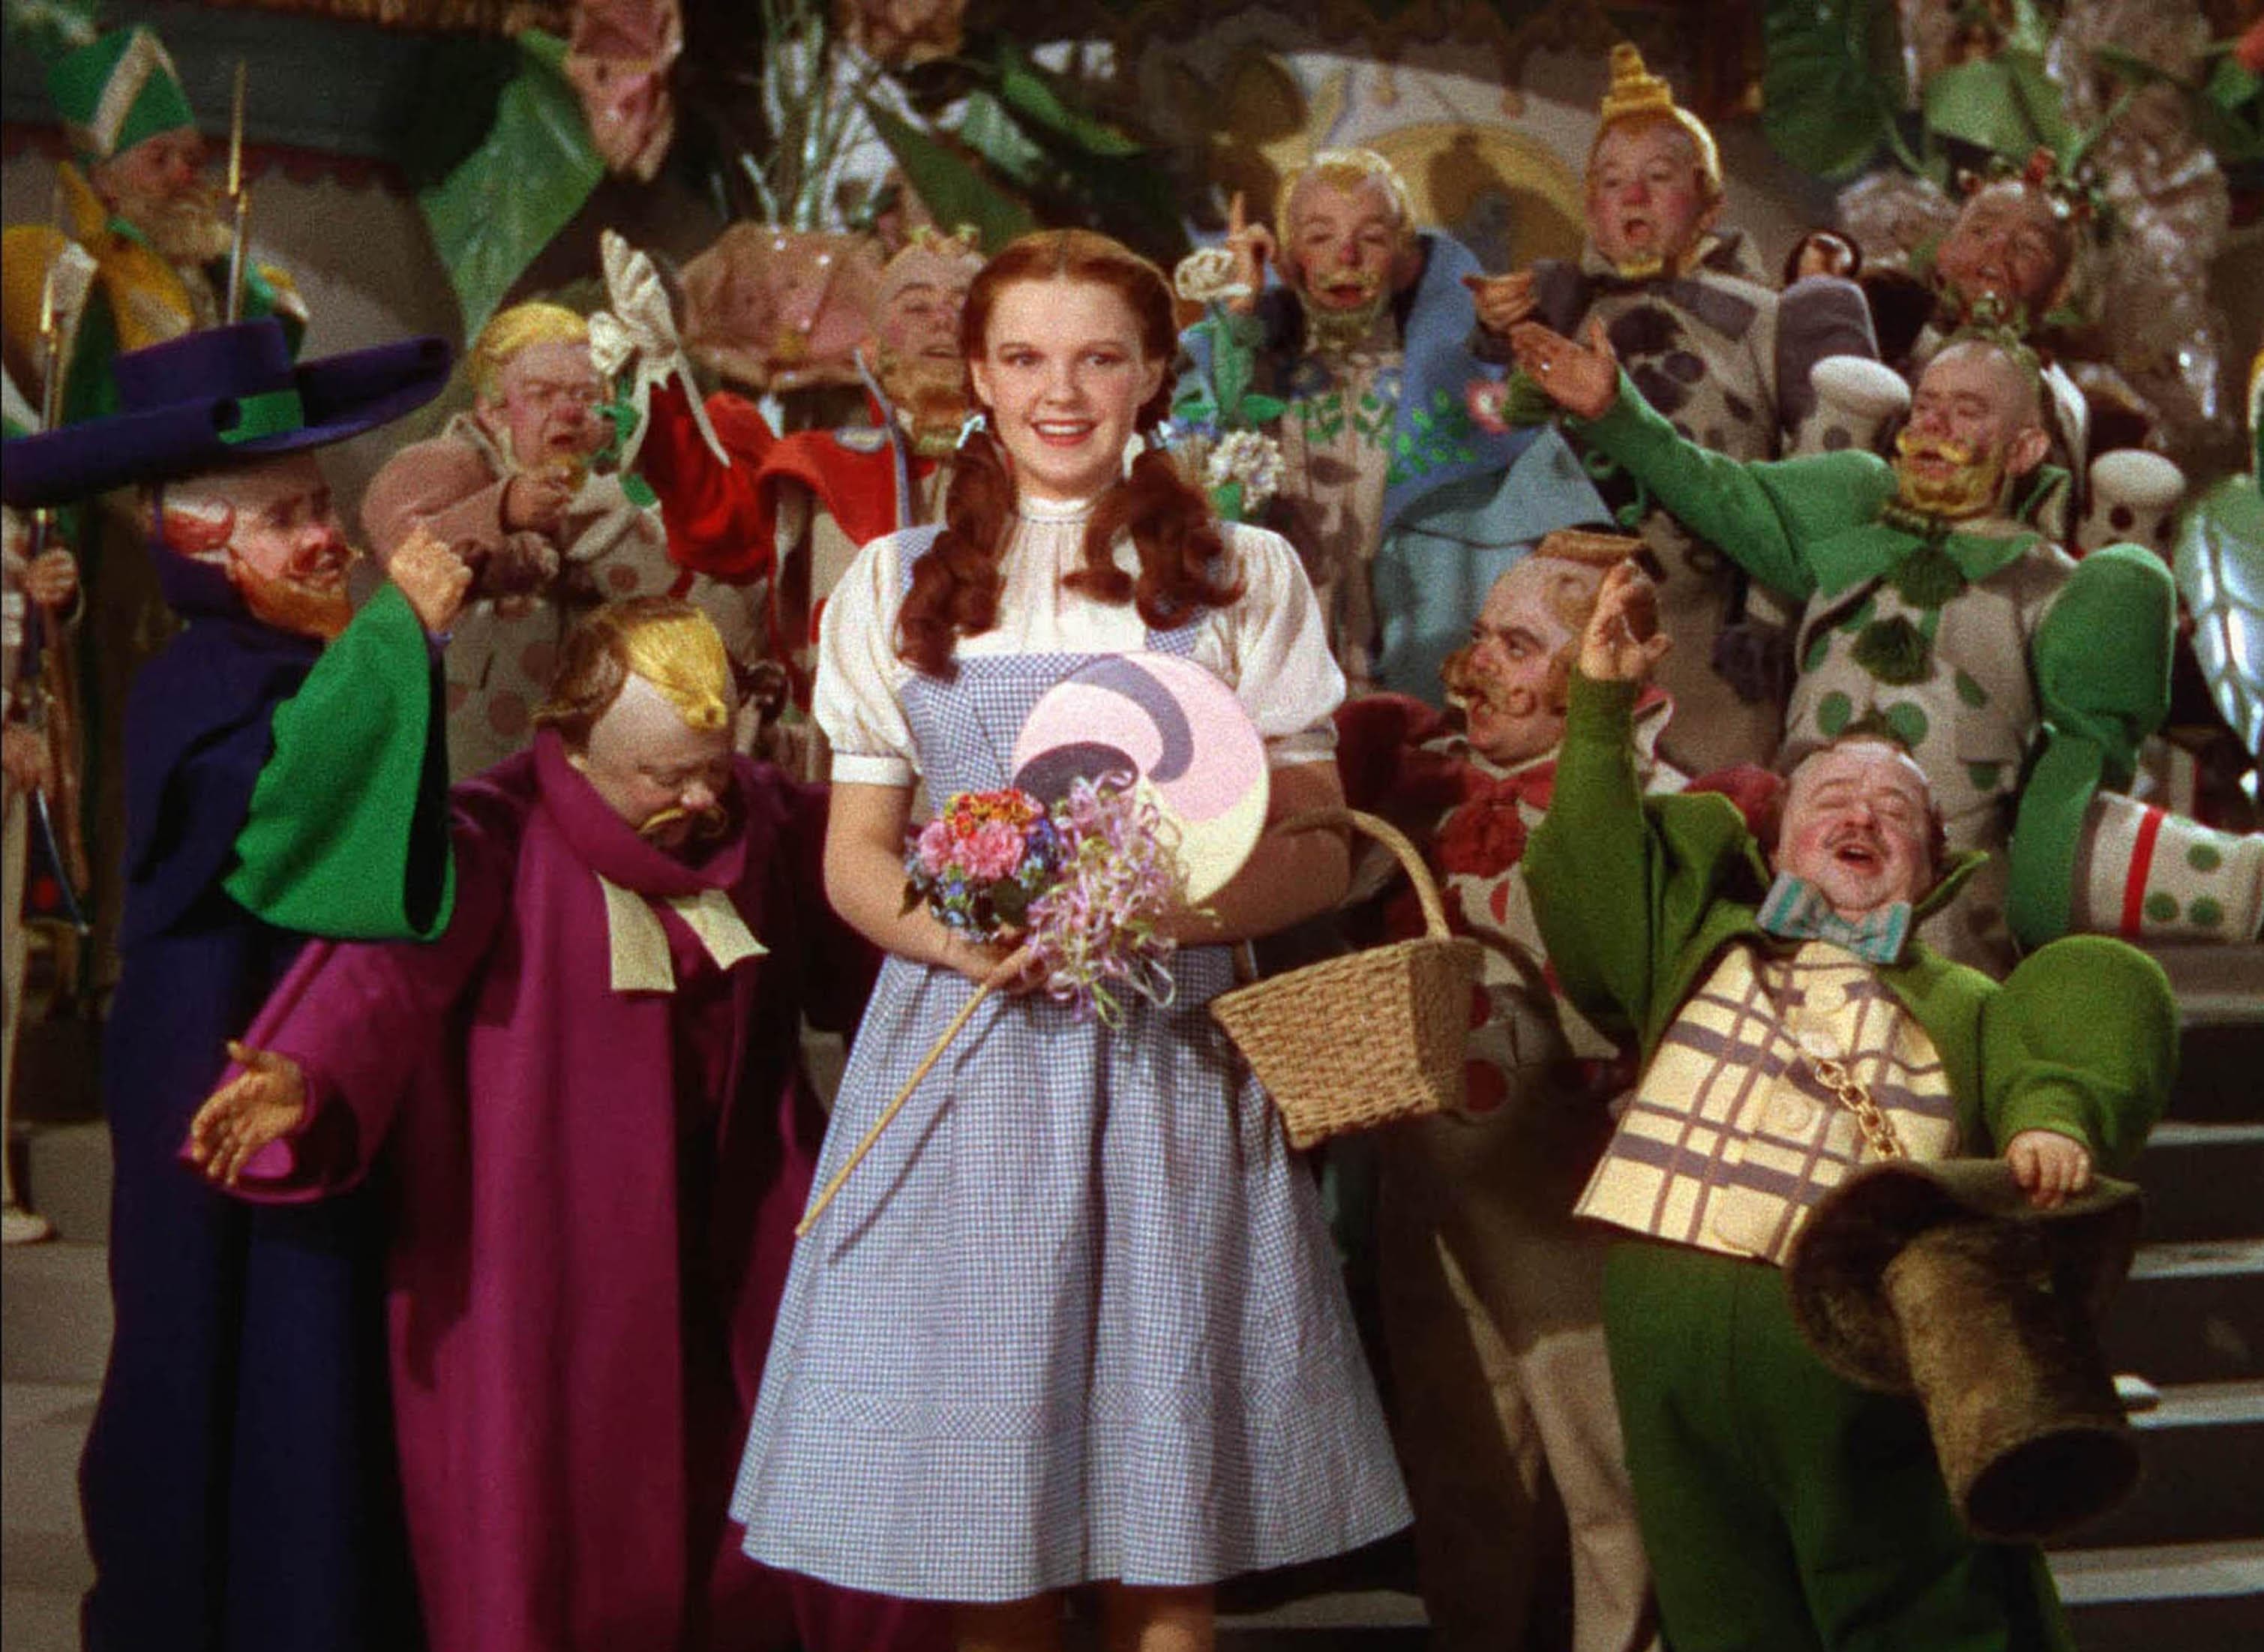 Random Nightmare Stories From Behind The Scenes Of 'The Wizard of Oz'